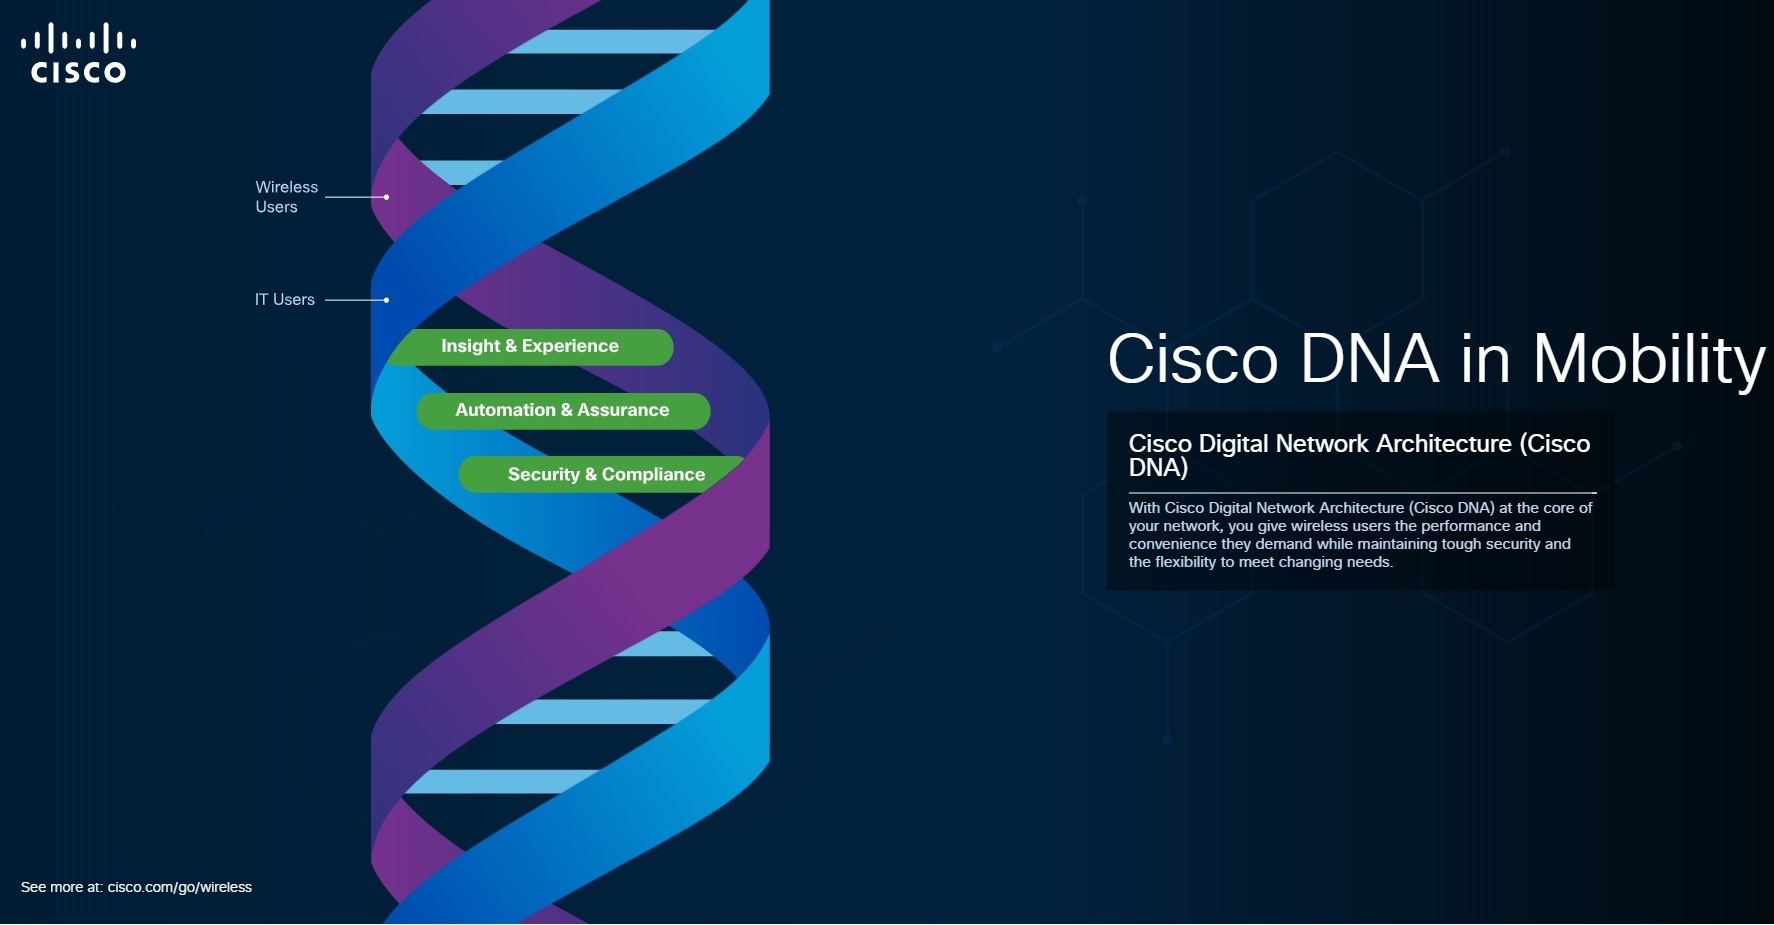 CISCO DNA in Mobility screen grab